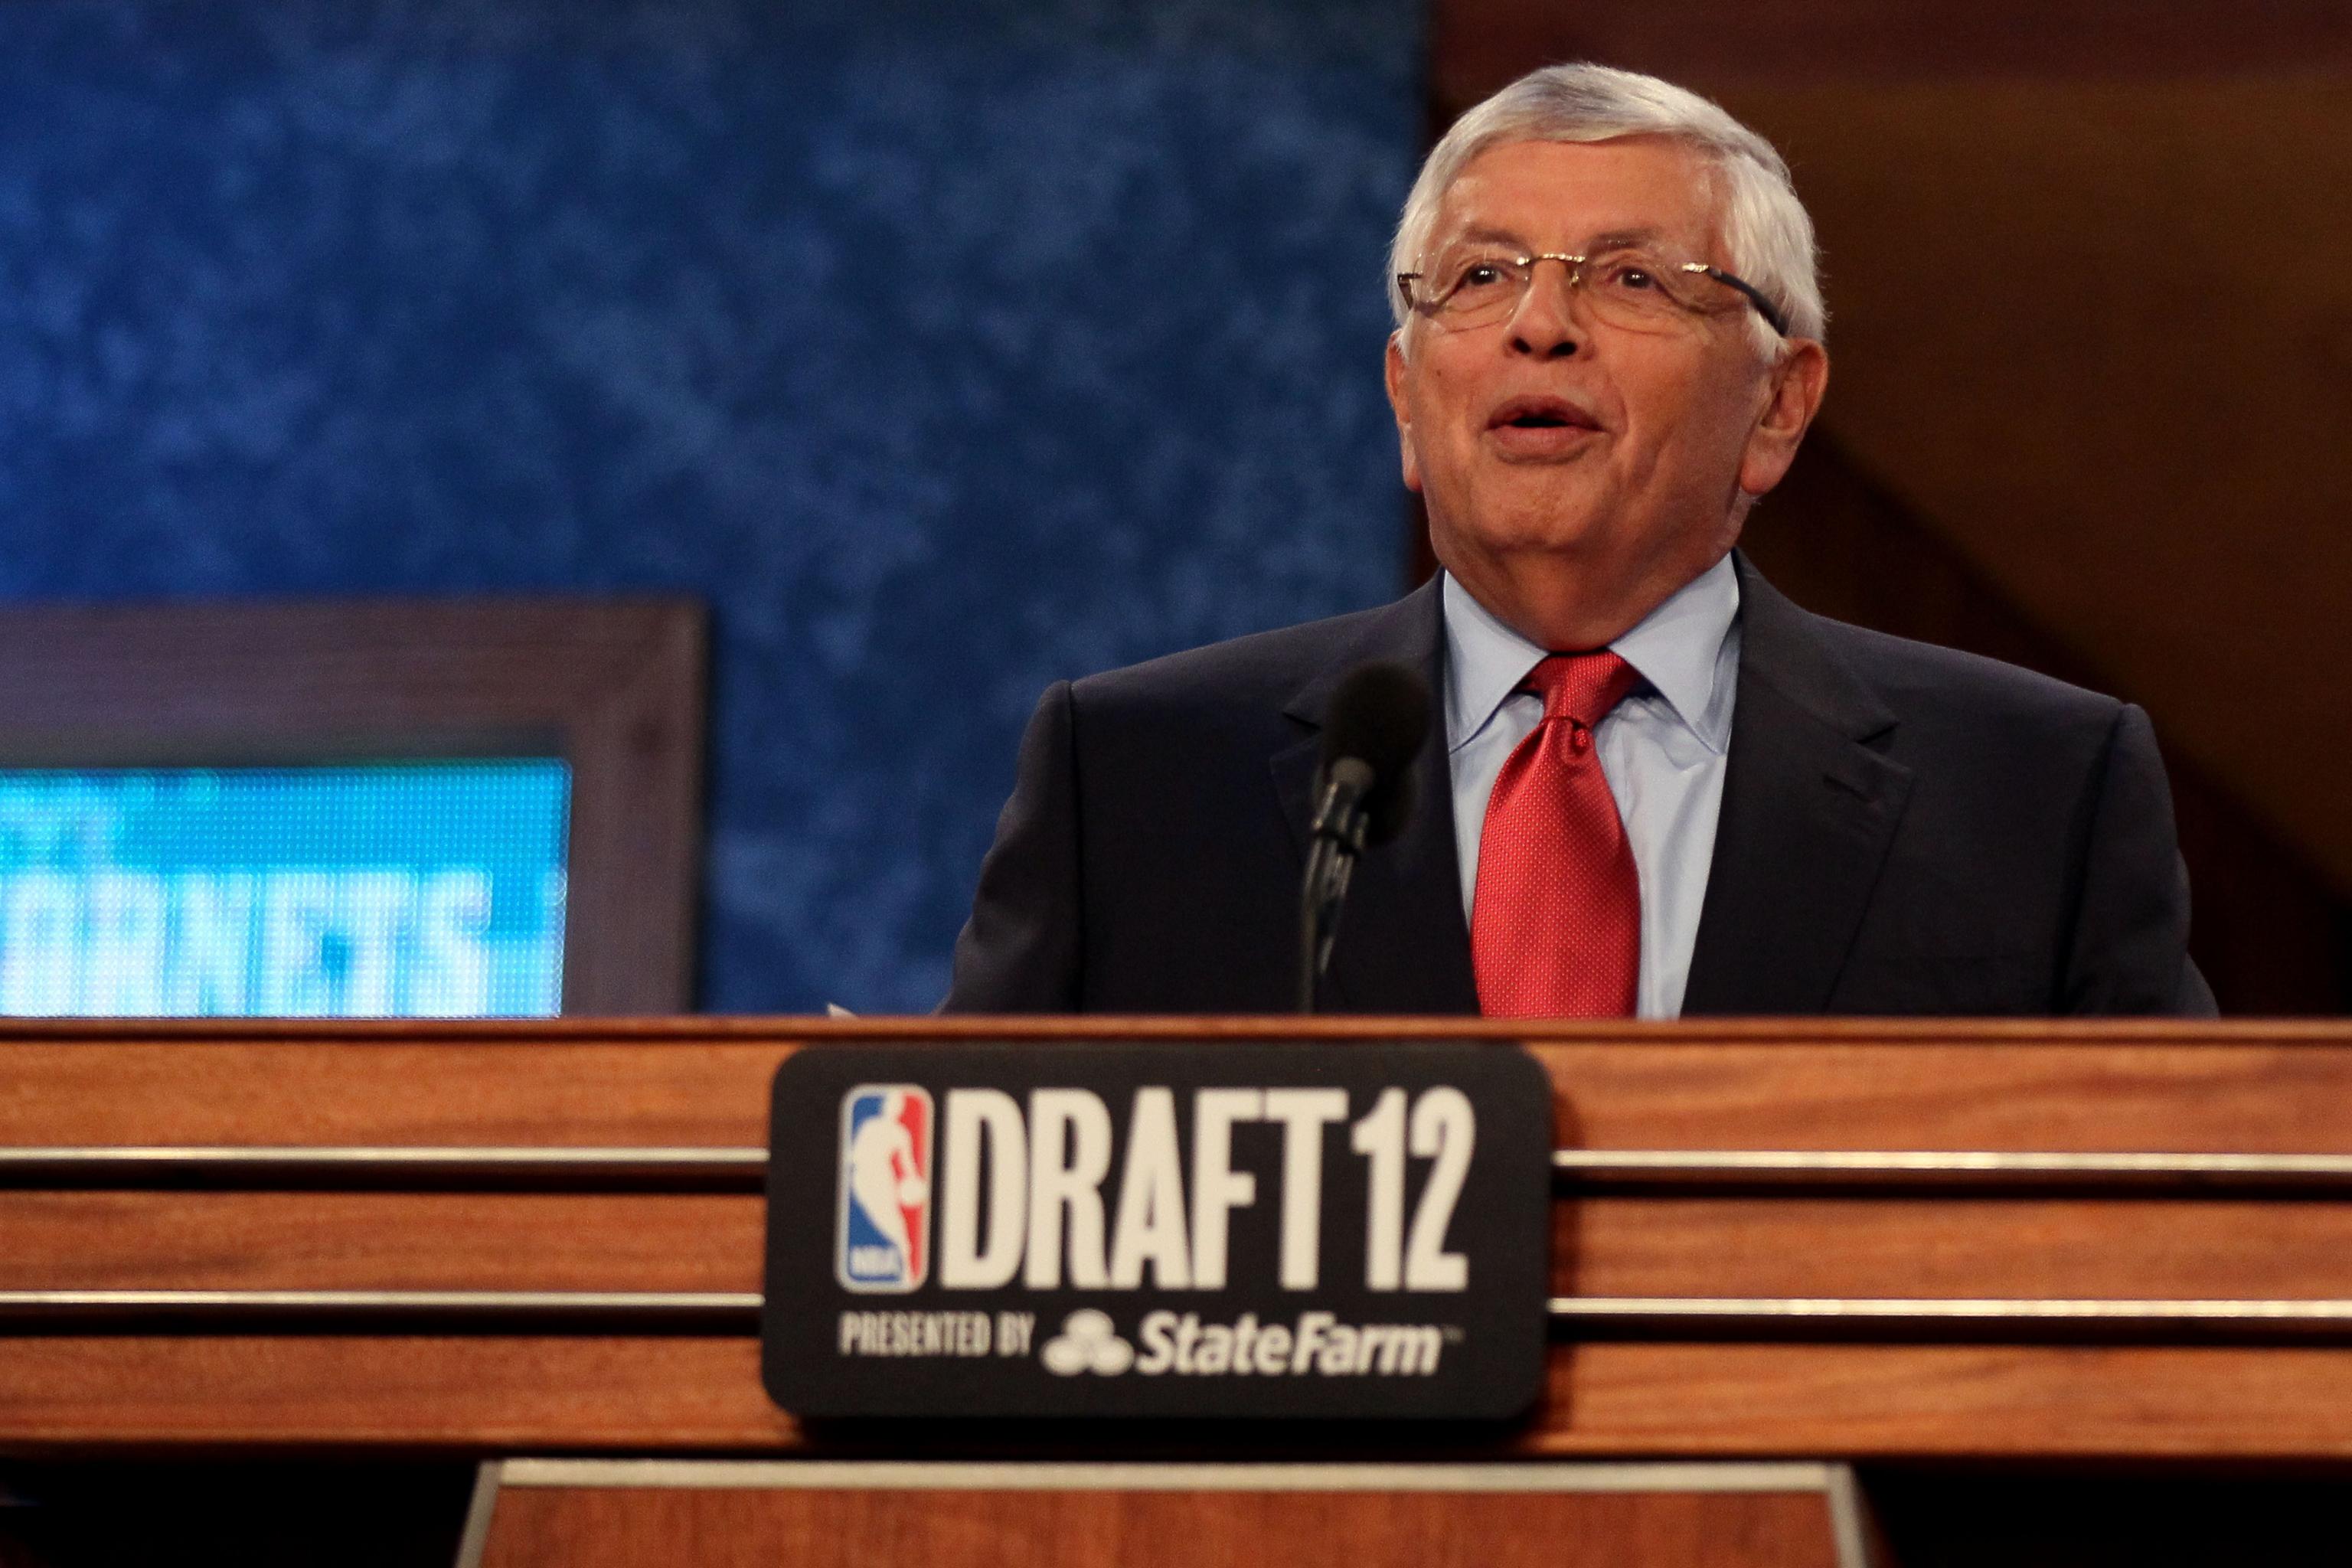 David Stern initially was cool to, but grew to embrace NBA's